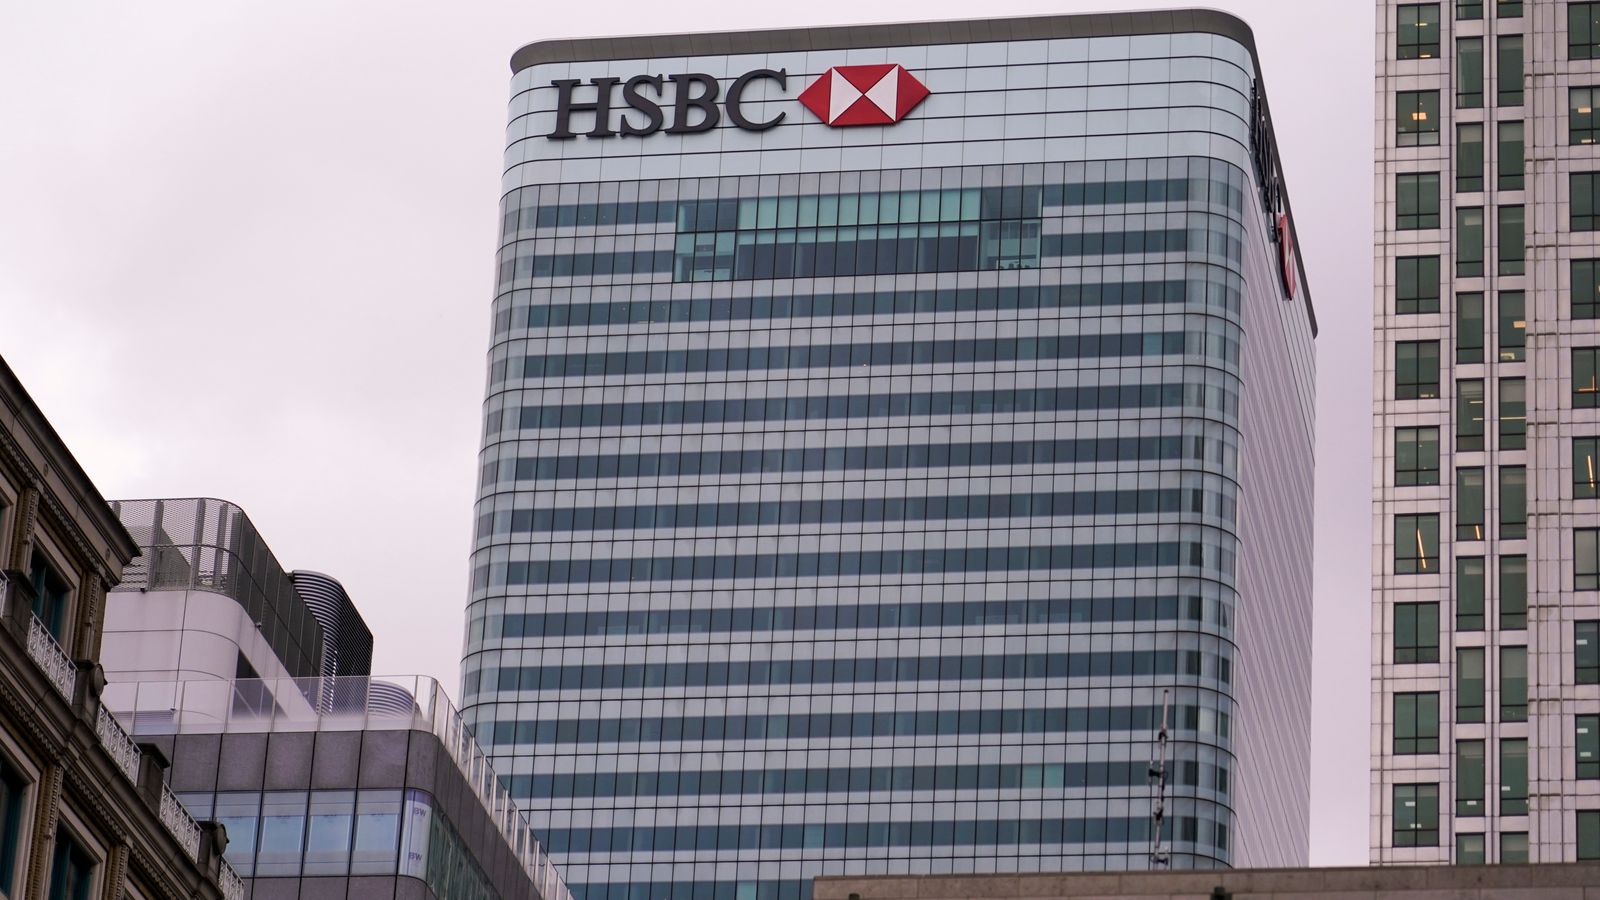 HSBC boss Quinn to depart after ‘intense’ 5 years as earnings ease